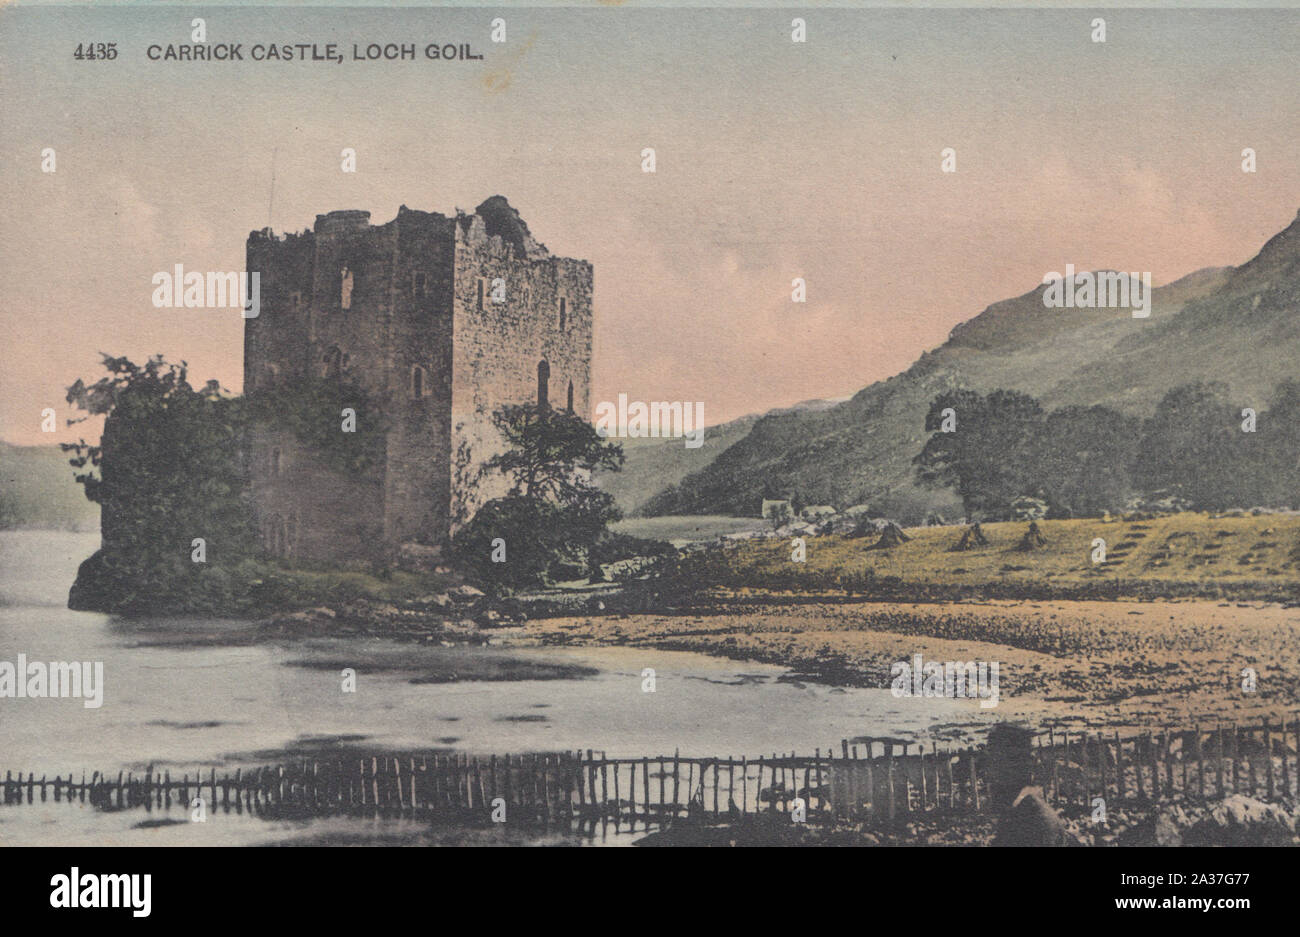 Carrick Castle, Loch Goil, Argyll and Bute, Scotland Stock Photo